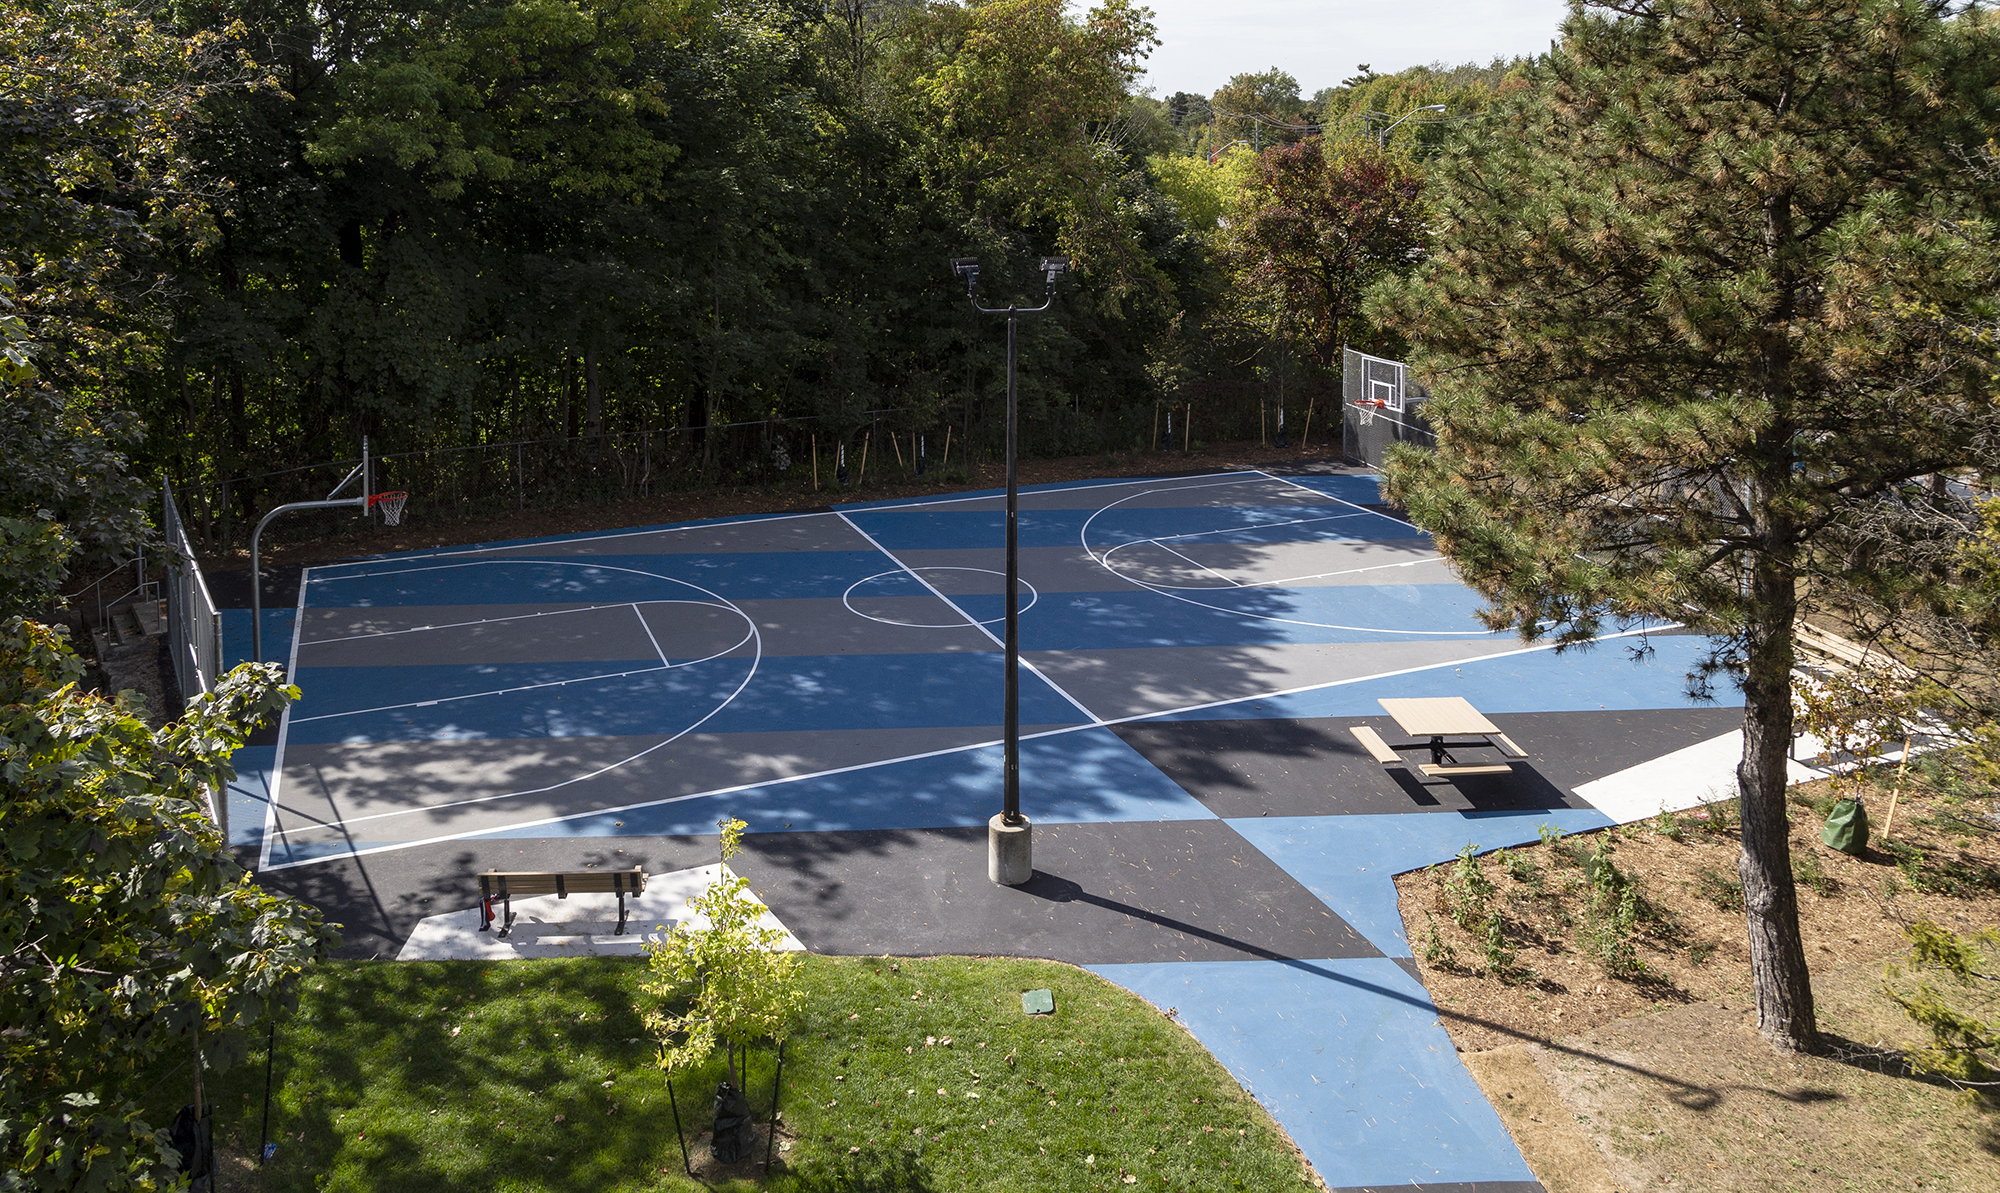 The basketball court at Lawrence-Orton